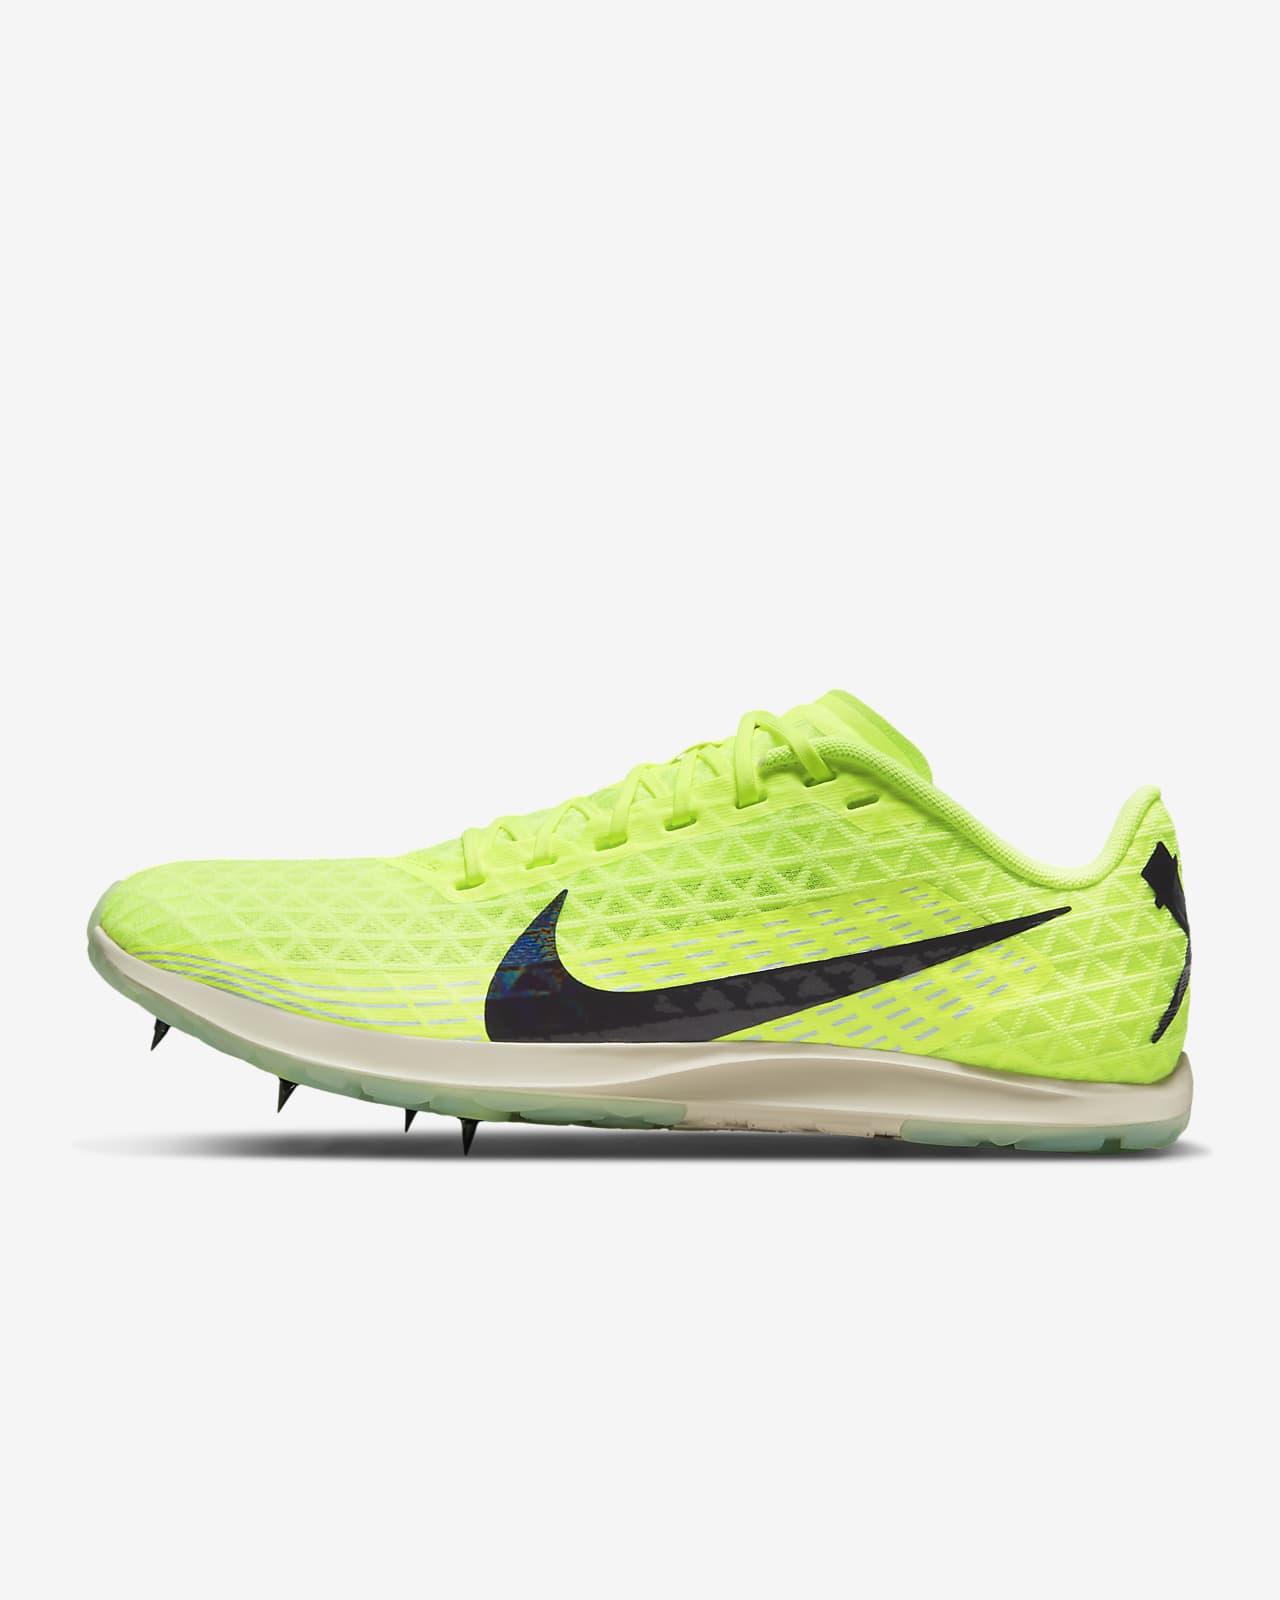 Nike Zoom Rival XC Track & Field Distance Spikes.